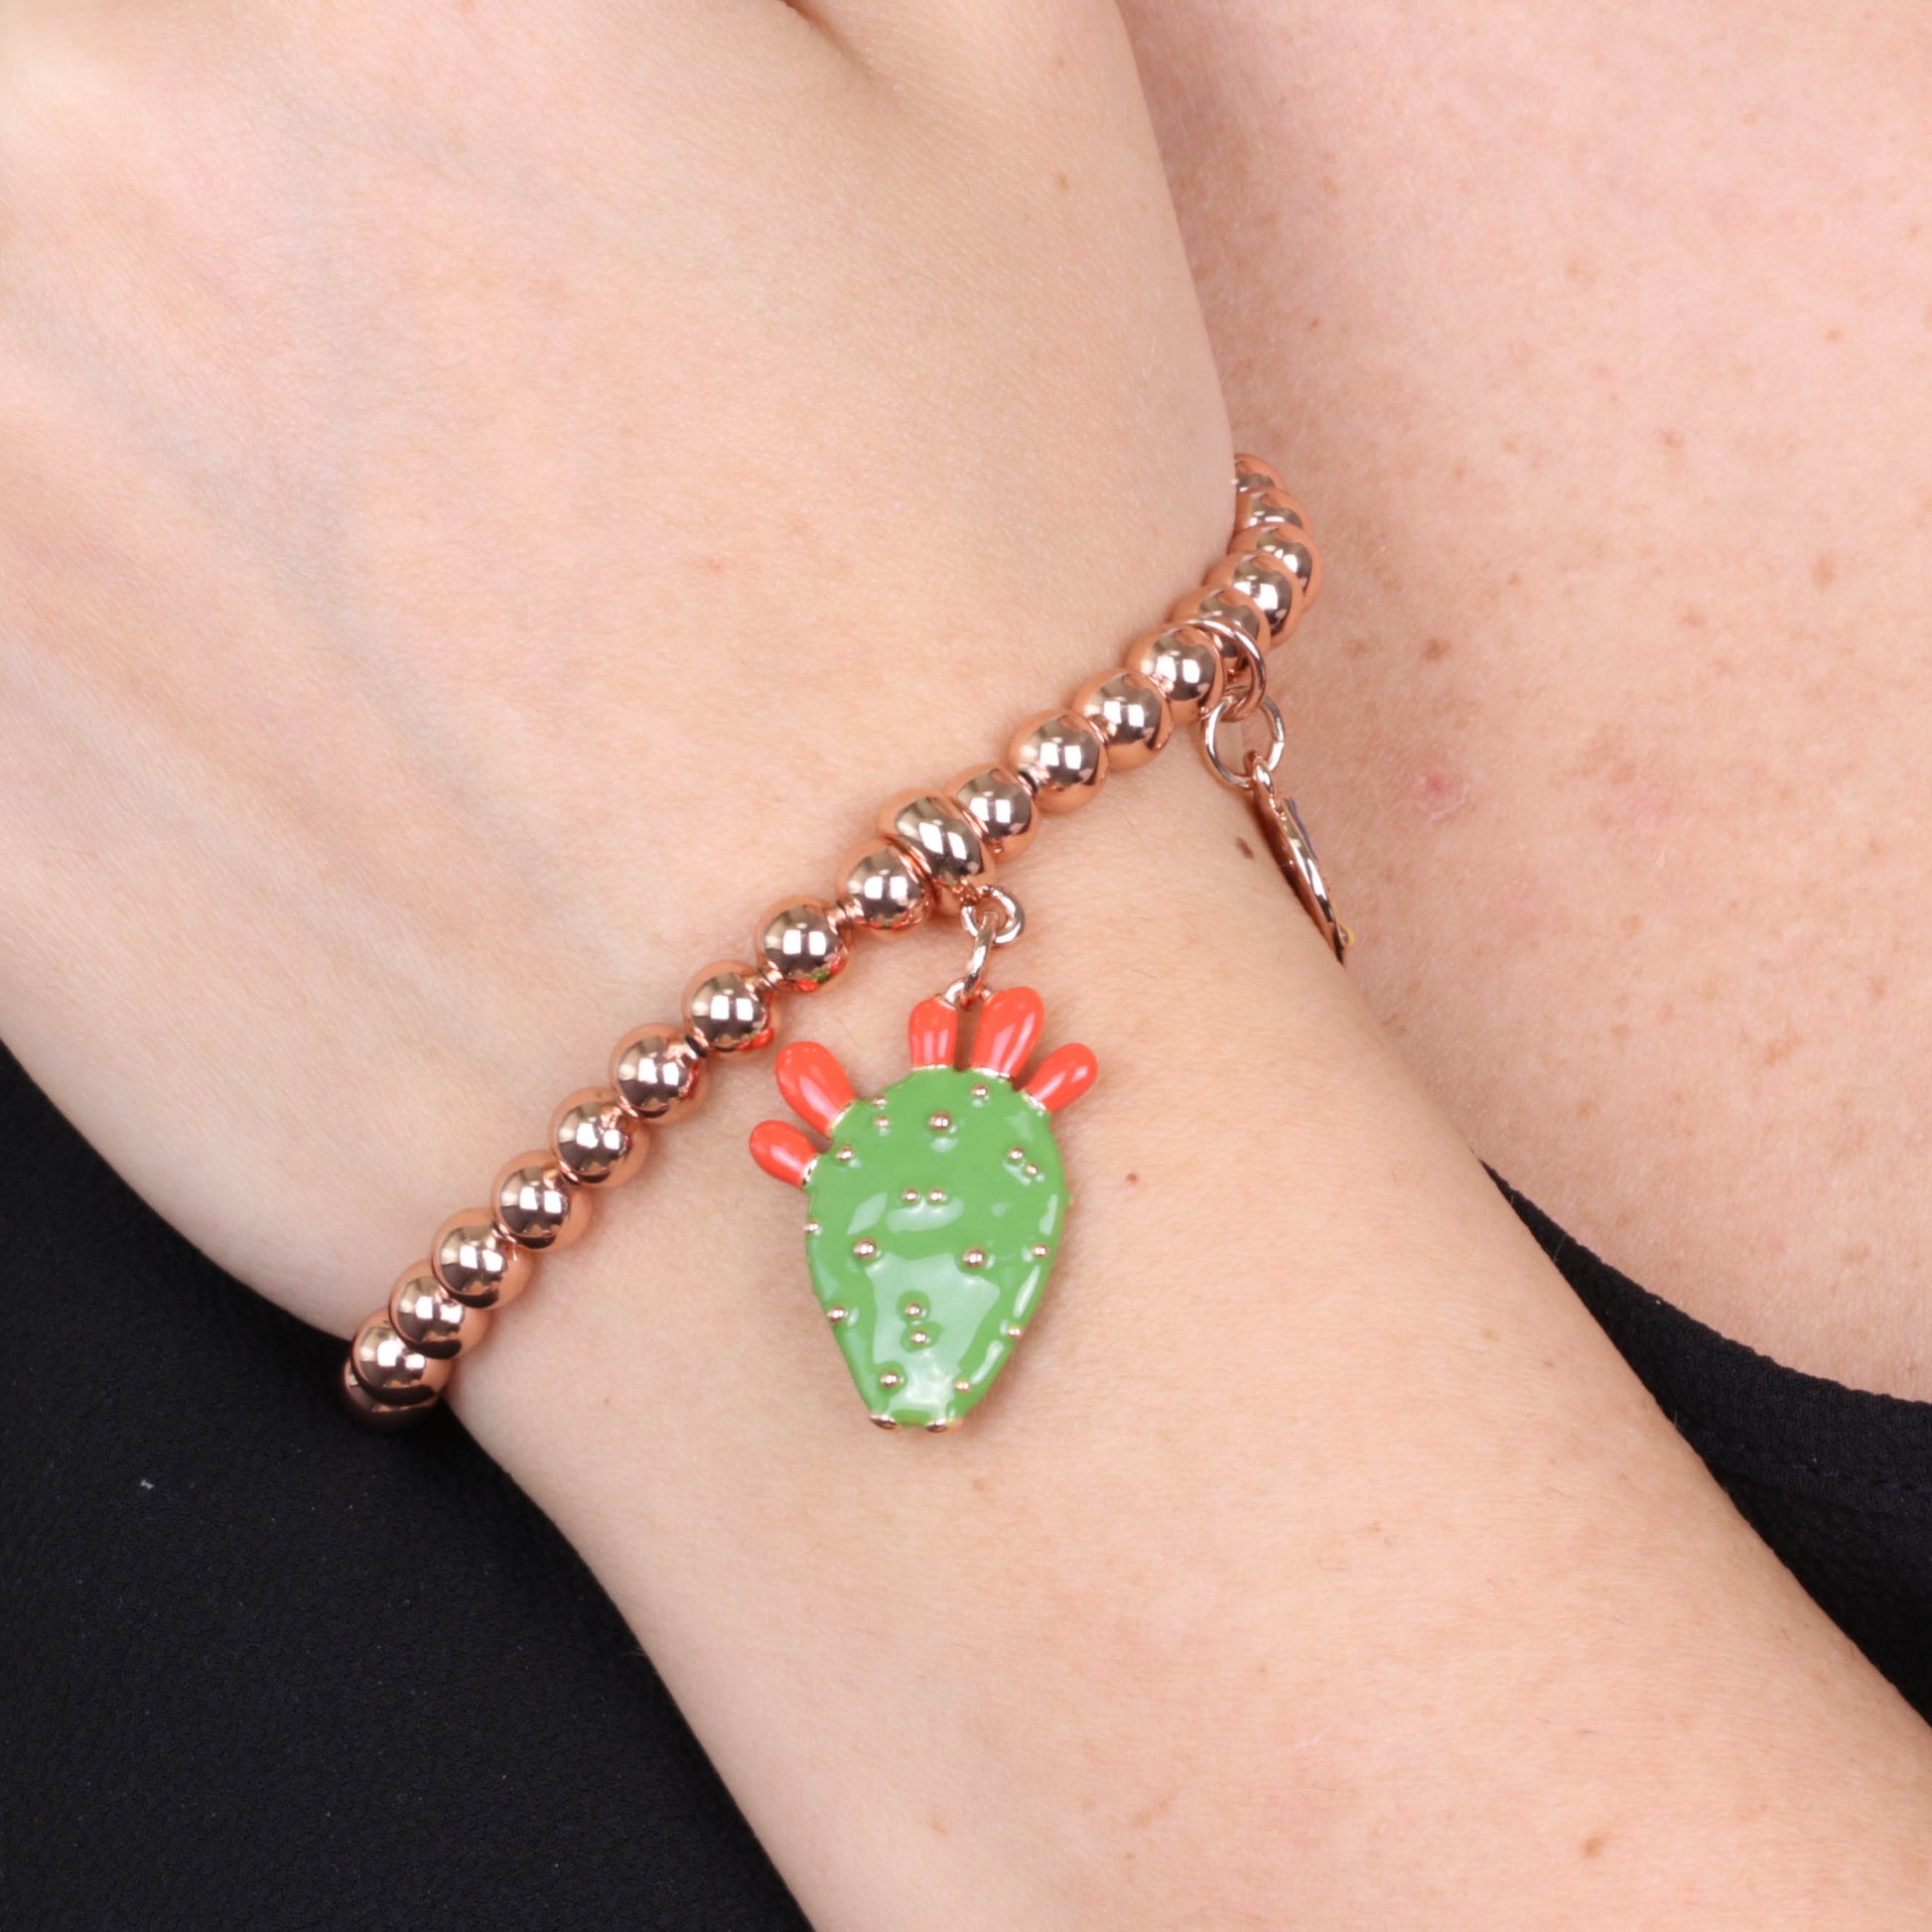 Metal bracelet spheres shirt, with pendant prickly pear, embellished with green enamel and red enamel tips